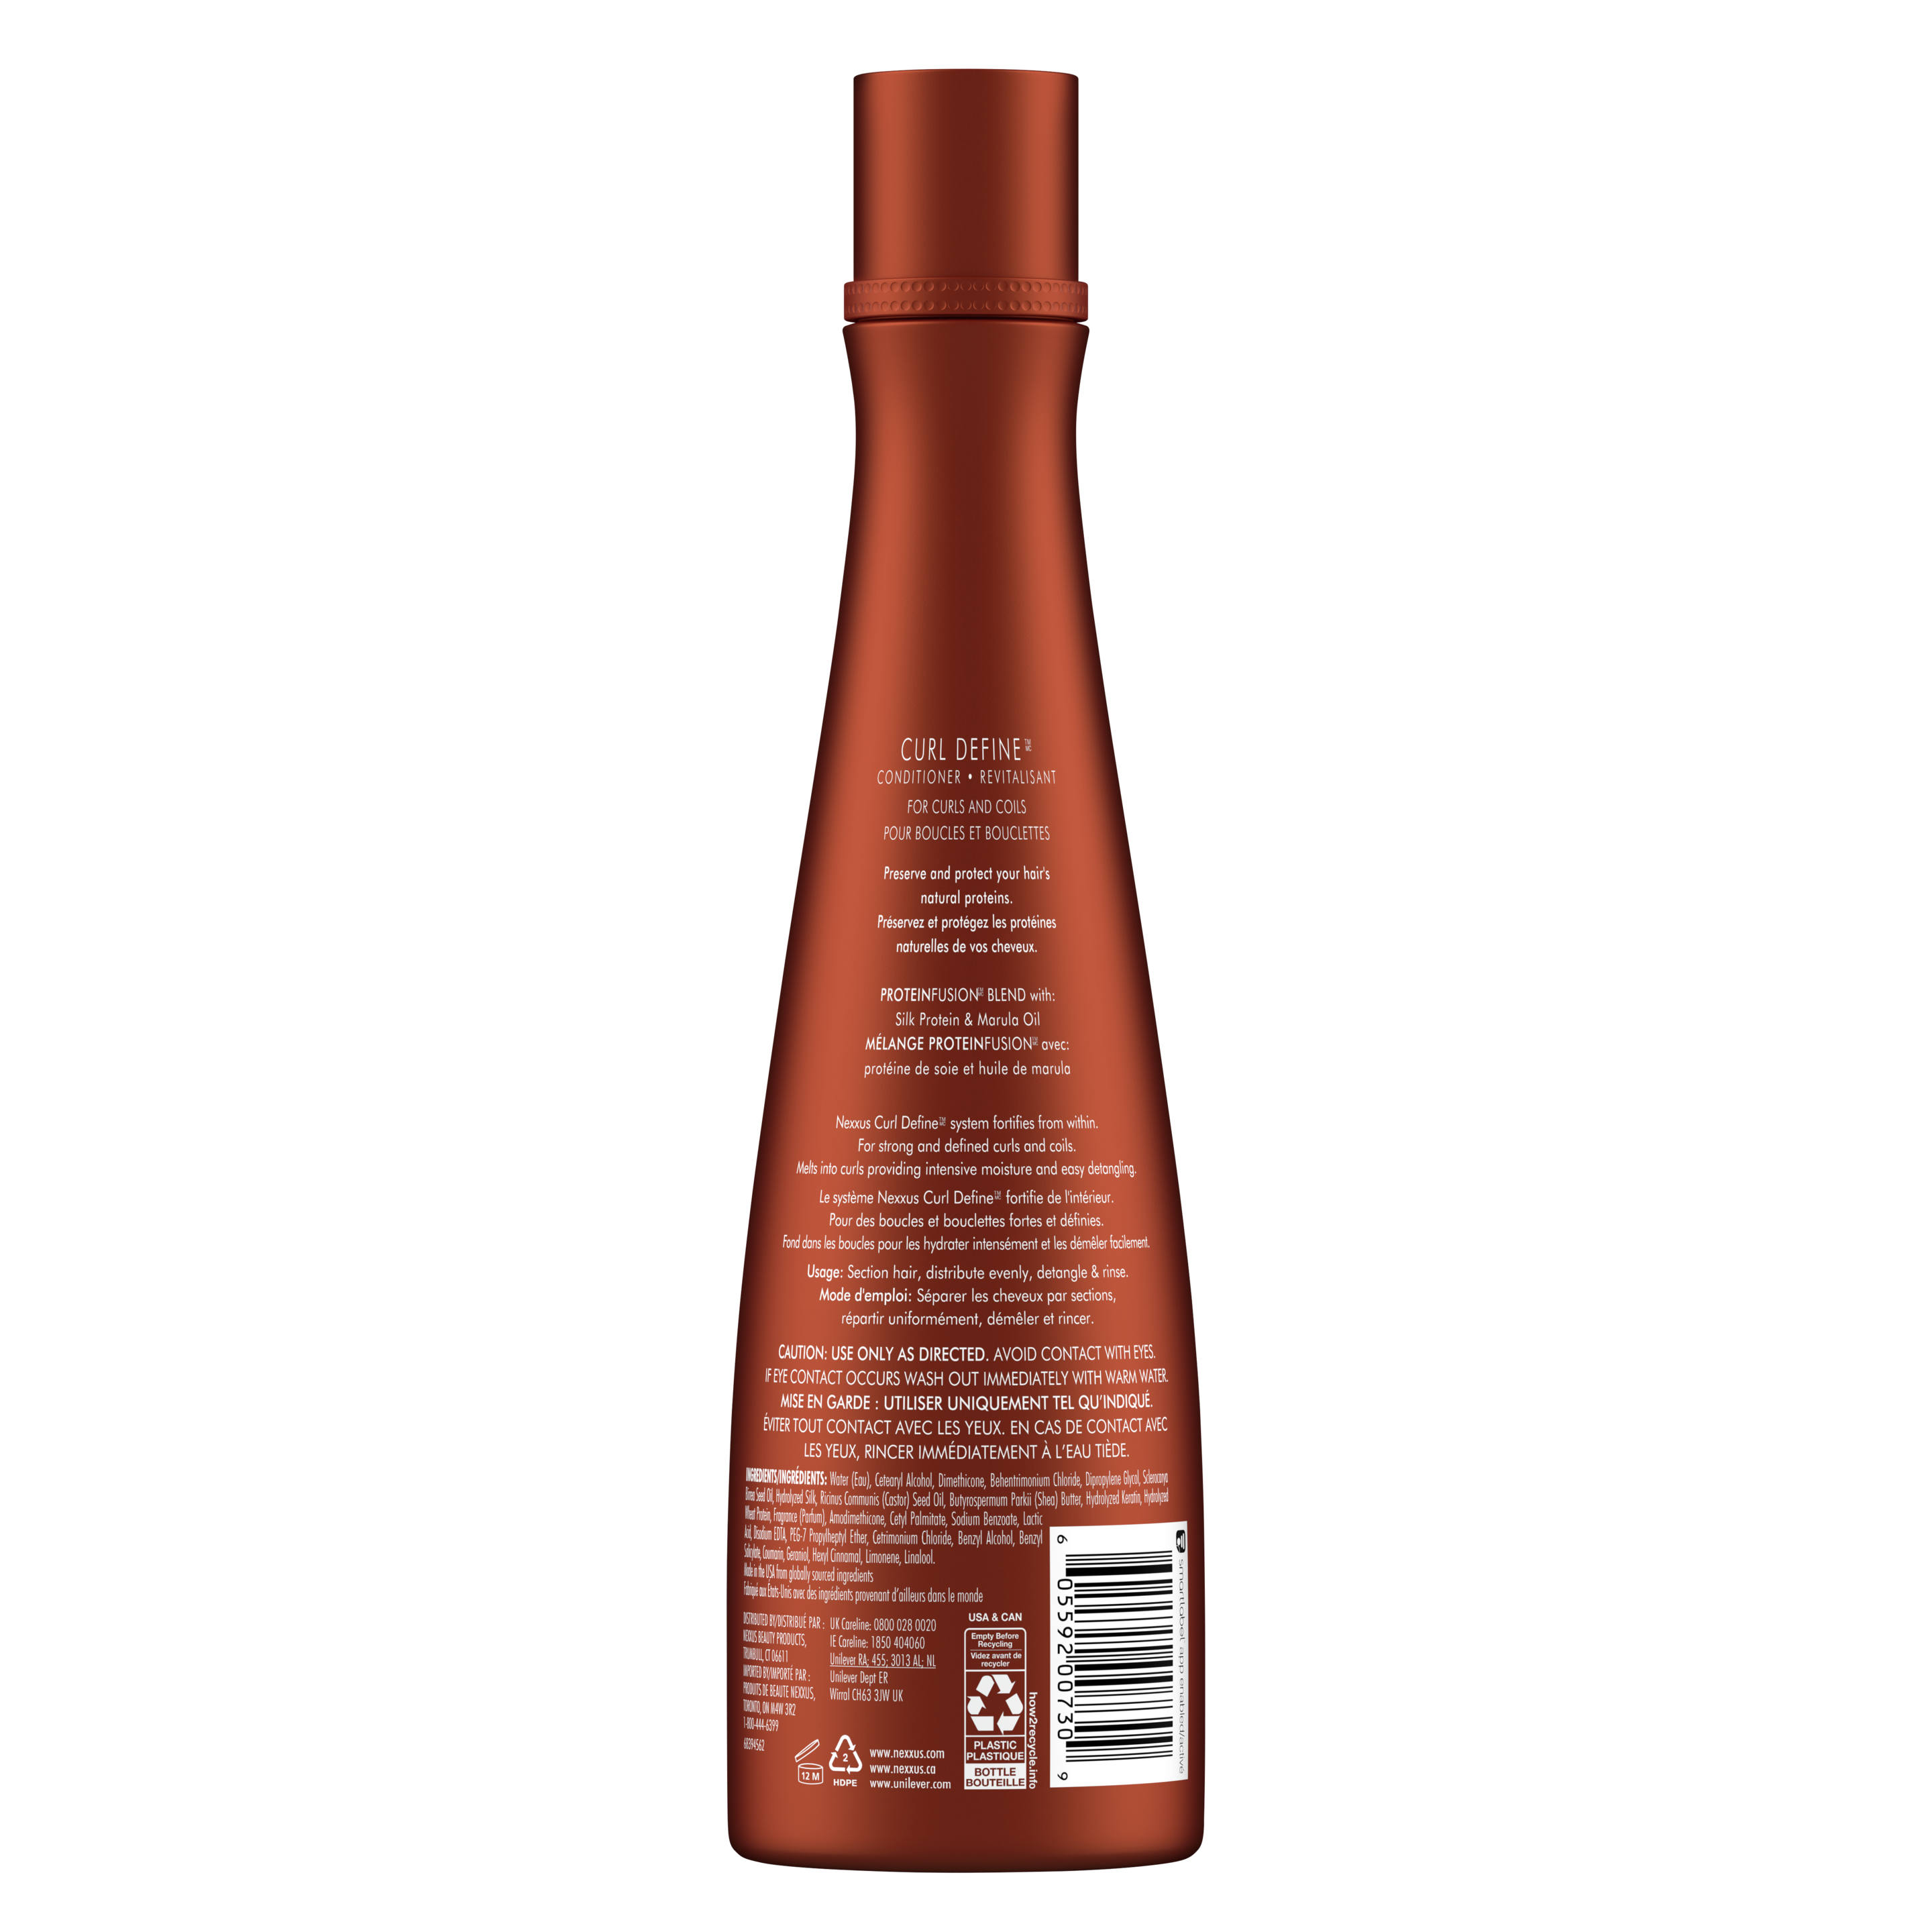 CURL DEFINE® CONDITIONER FOR CURLY HAIR